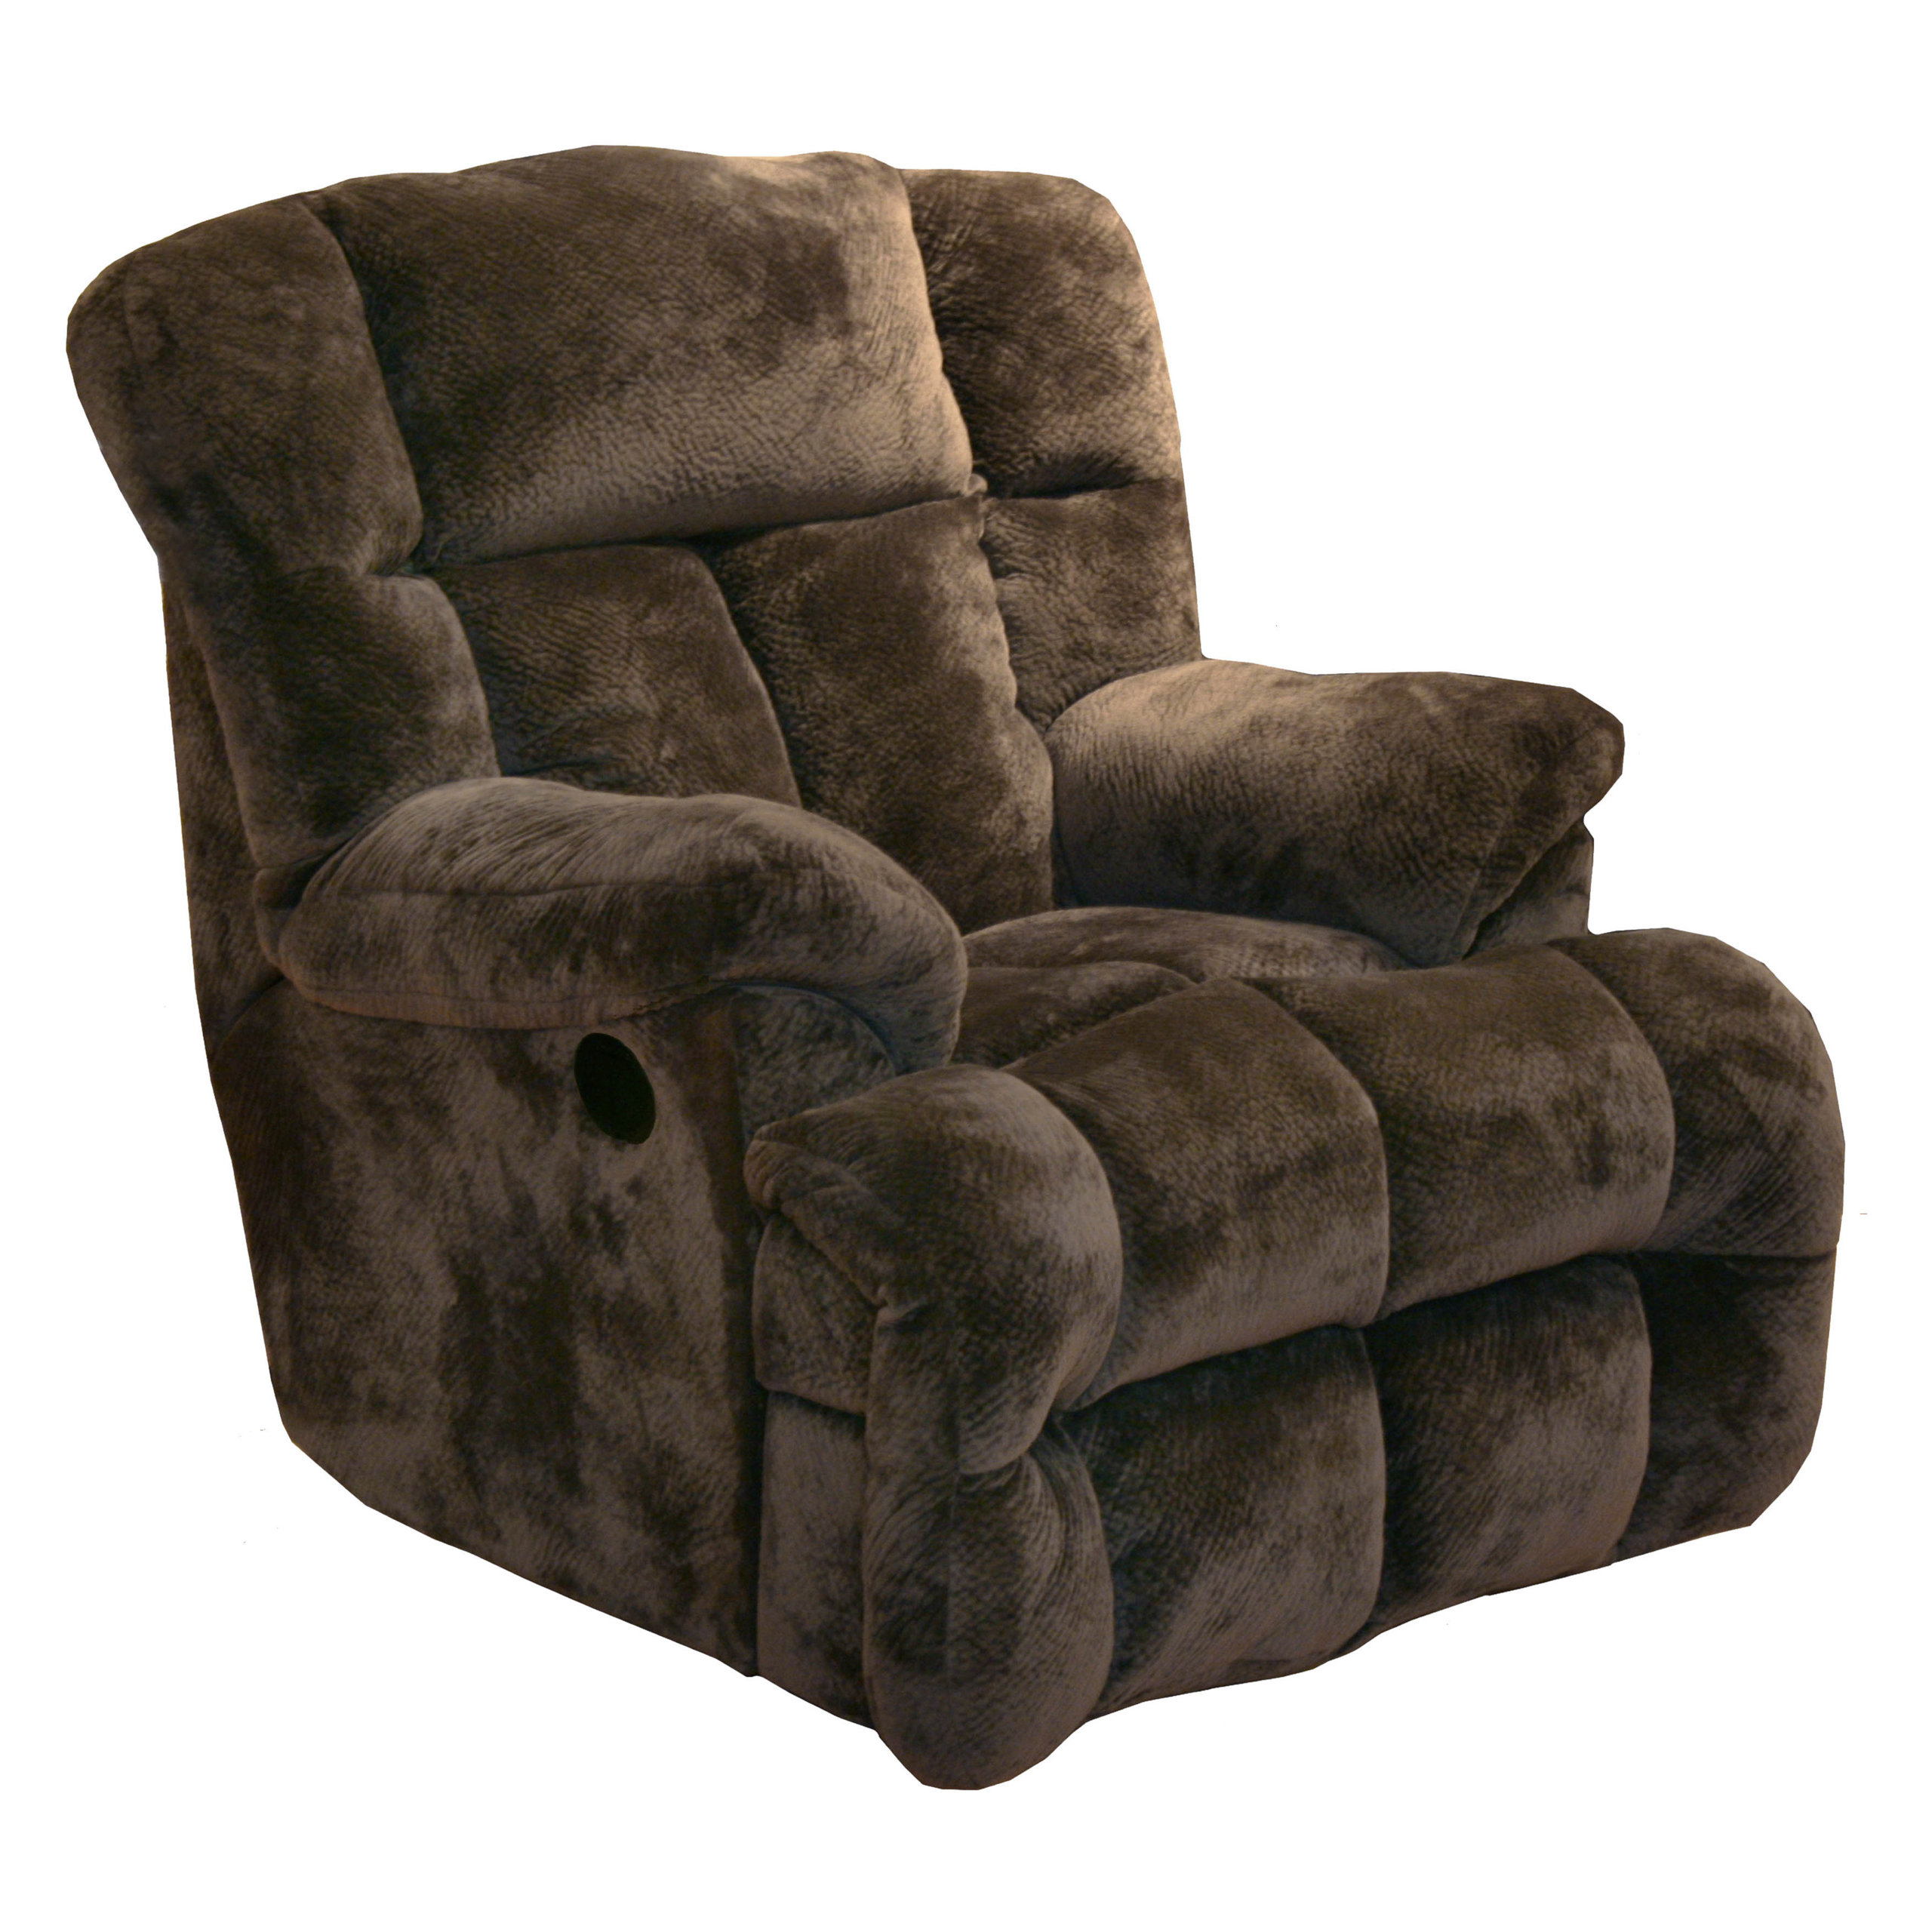 Catnapper Cloud 12 Power Chaise Recliner - Chocolate